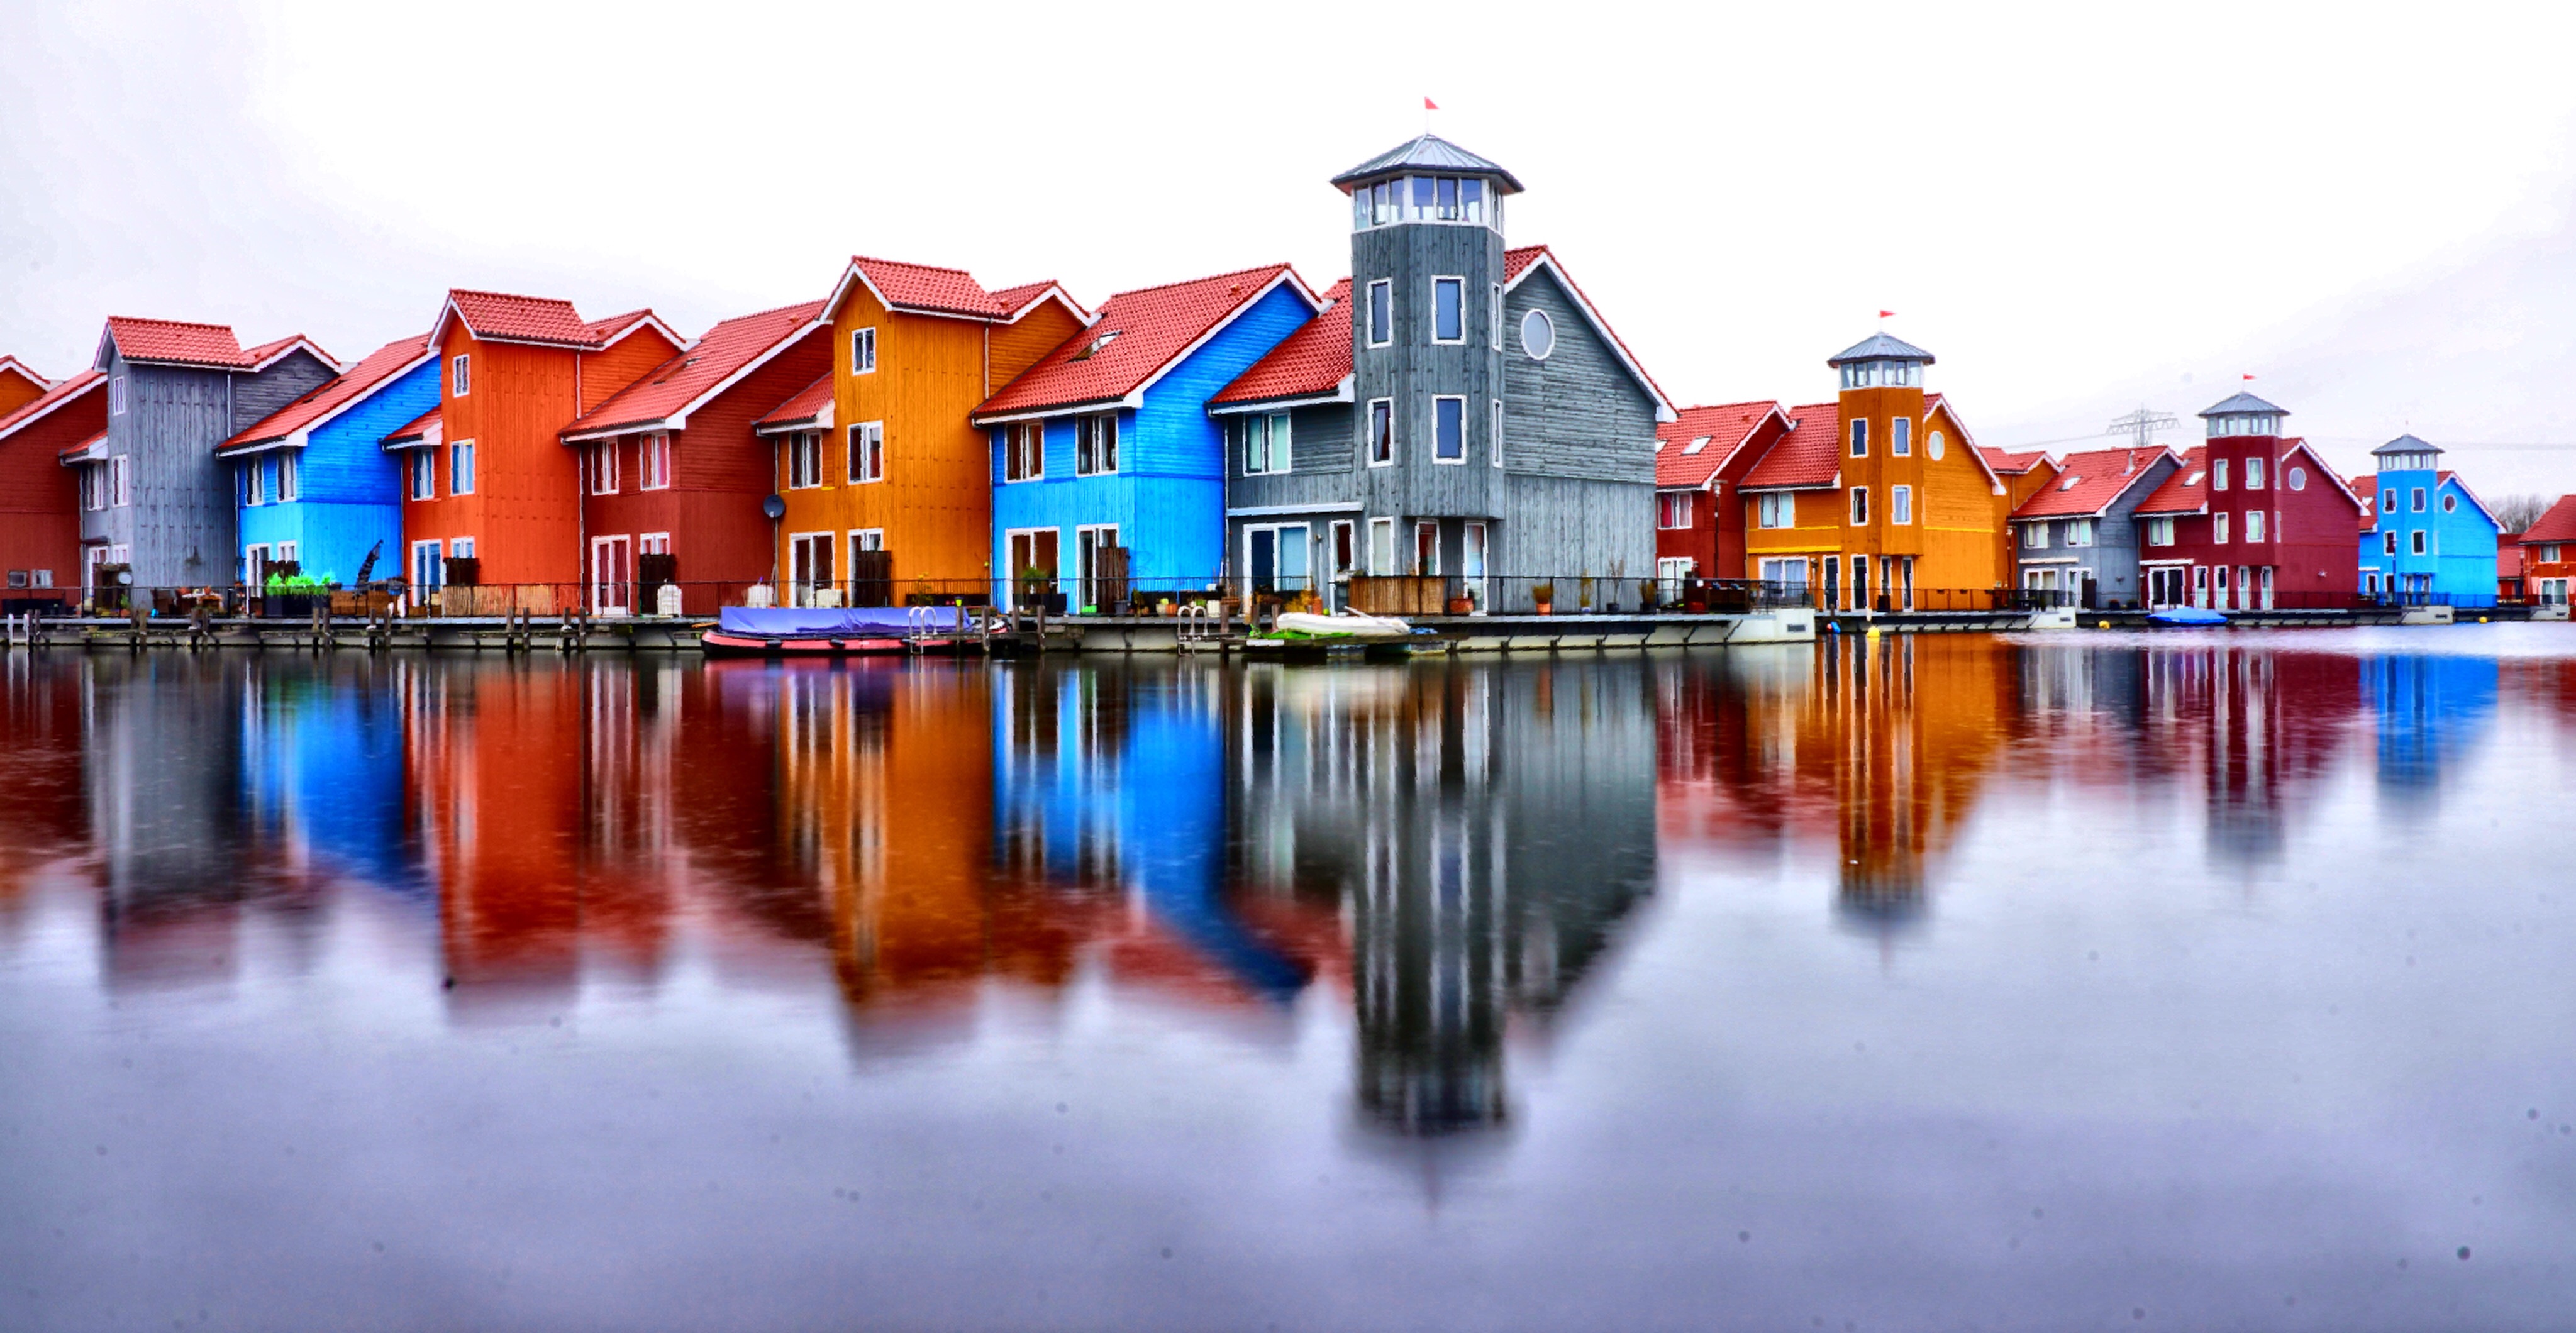 CoLORFuL HOuSeS